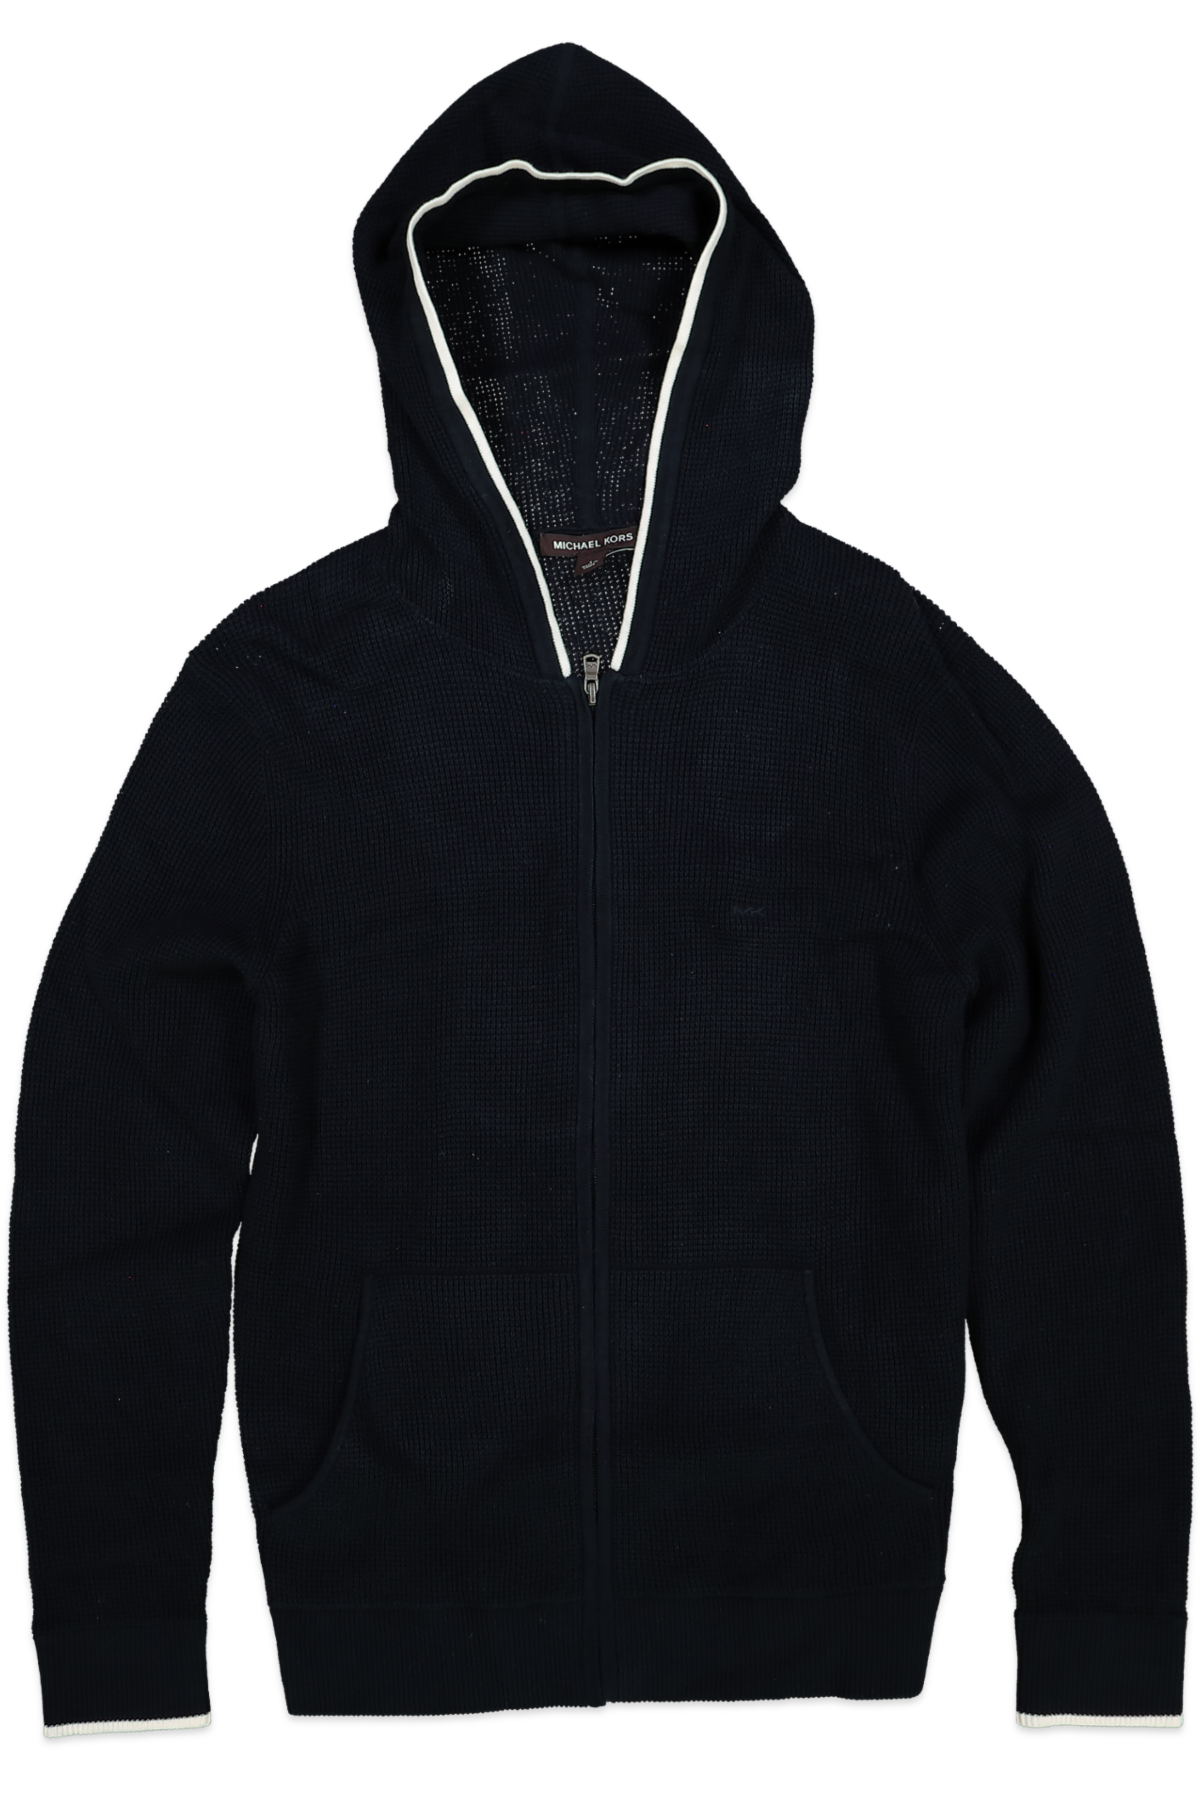 MICHAEL KORS MIDNIGHT THERMAL HOODIE WITH POCKETS